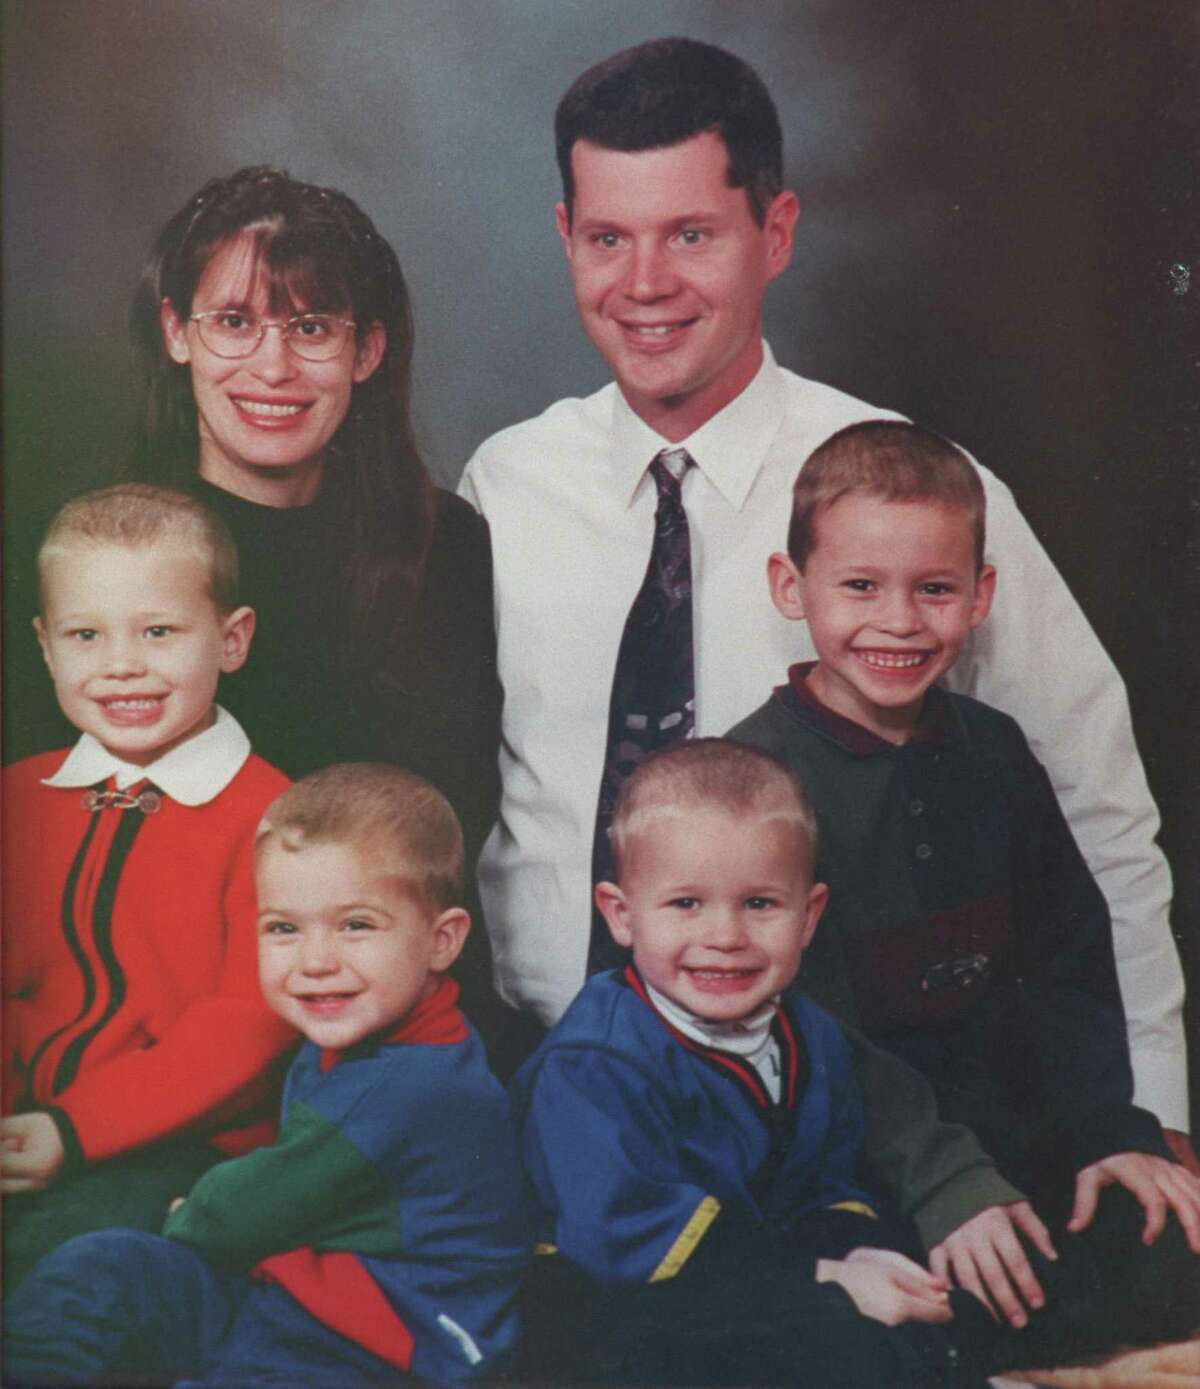 The Yates family is shown in this photograph taken in November, 2000. Back row, Andrea Yates, pregnant with daughter Mary, and her husband, Russell. Front row are John, 5, Luke, 2, Paul, 3, and Noah, 7. Andrea Yates is accused of drowning her five children in the family bathtub.